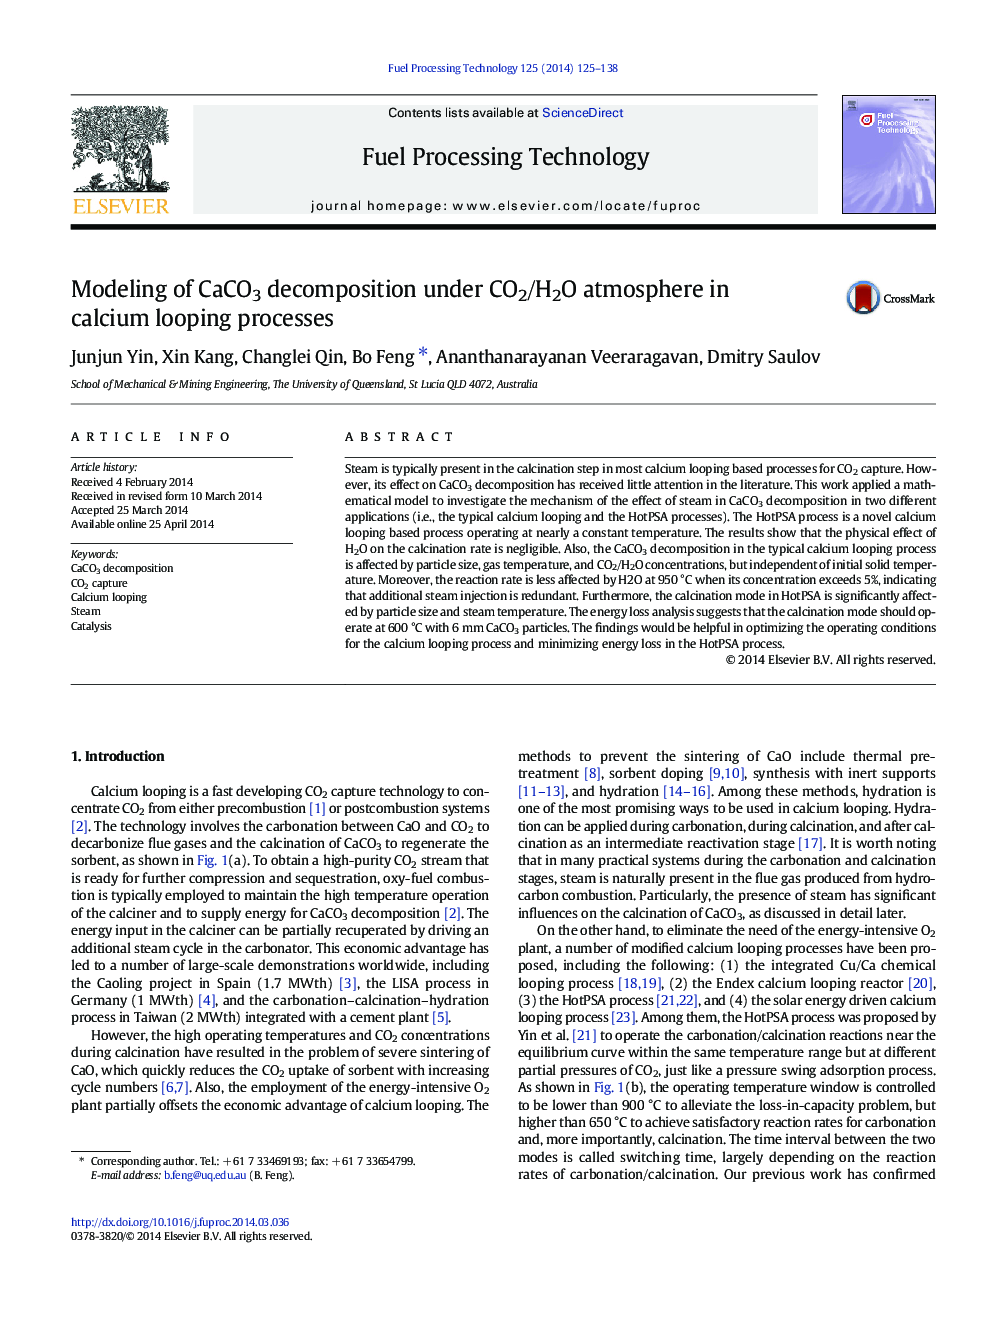 Modeling of CaCO3 decomposition under CO2/H2O atmosphere in calcium looping processes